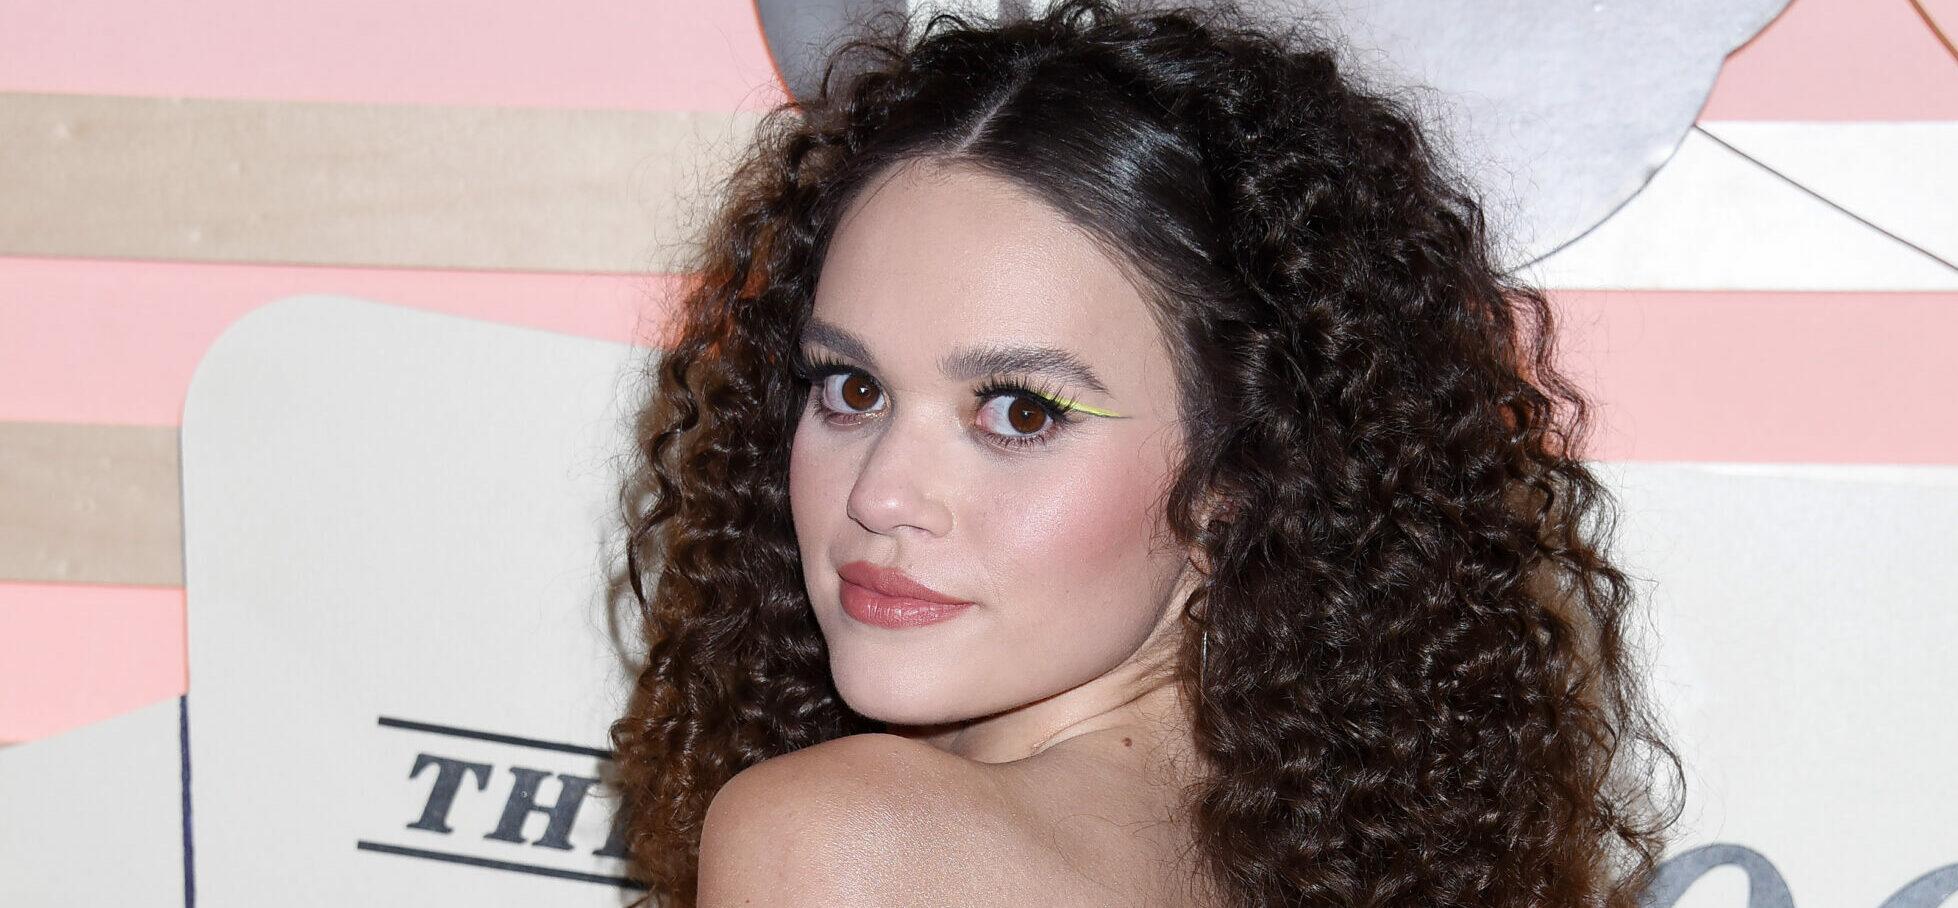 Madison Pettis Wears Tight Dress Highlighting ‘Beautiful Curves’ For New Year